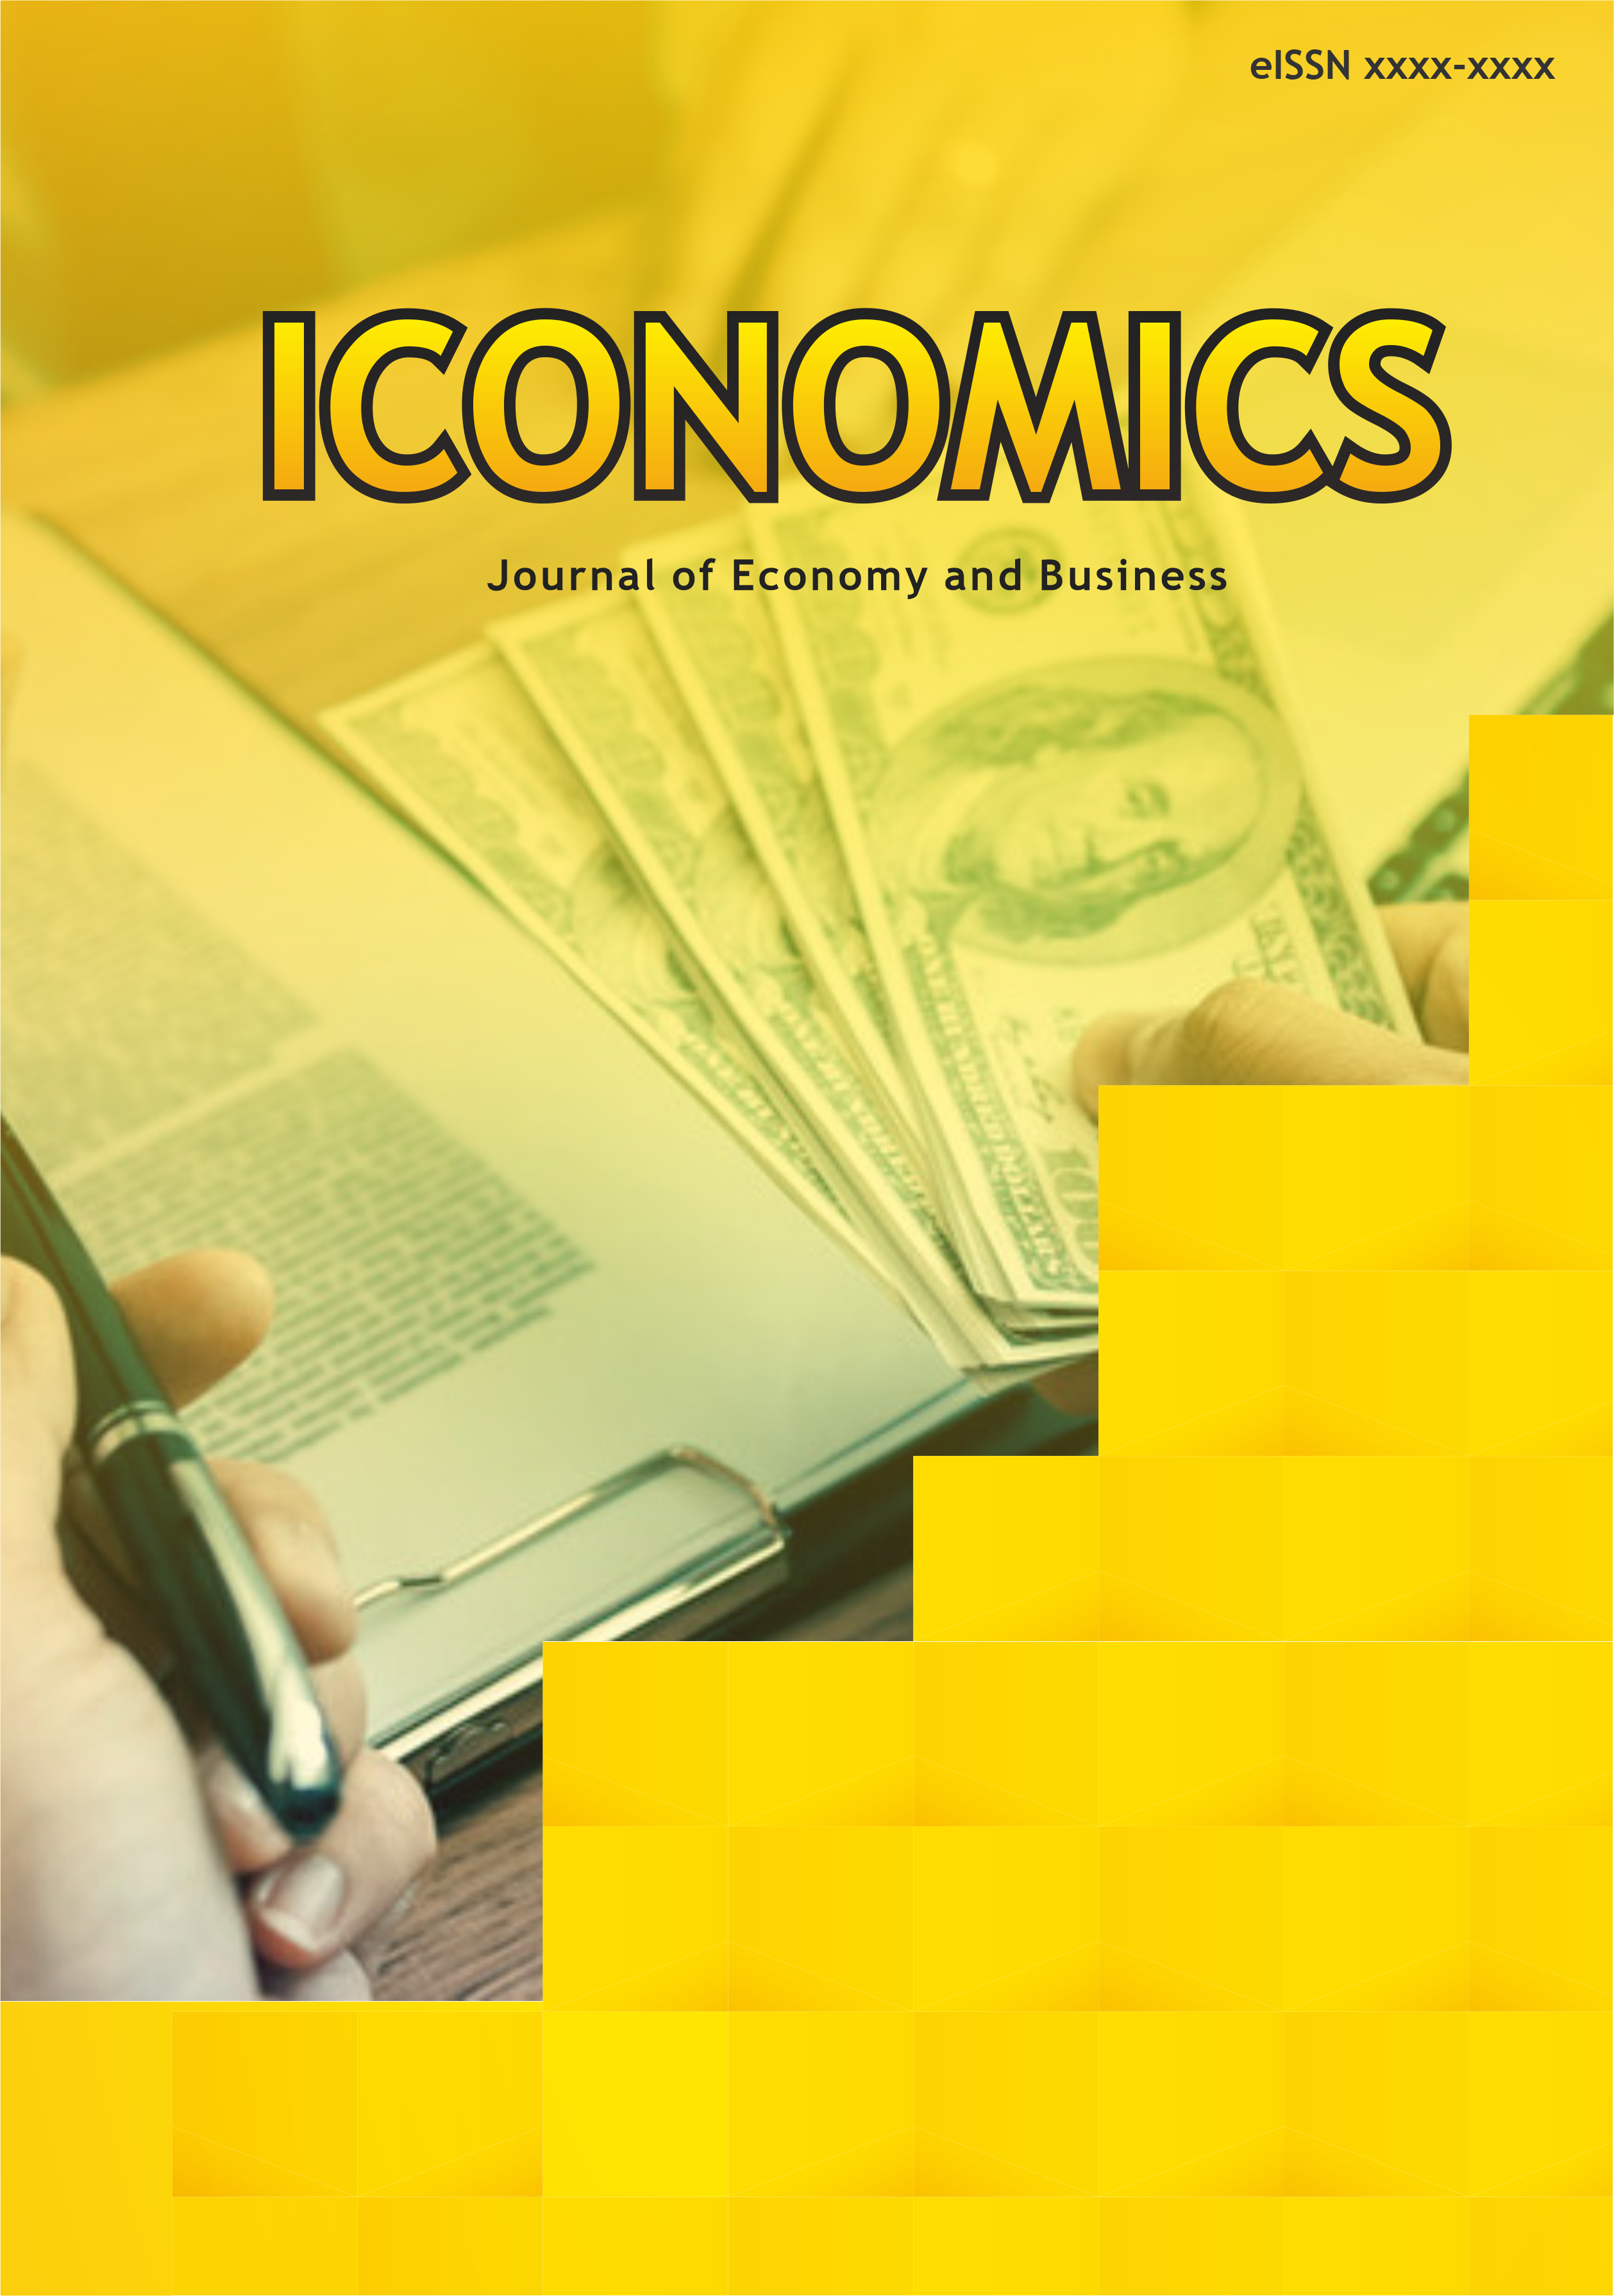 ICONOMICS: Journal of Economy and Business